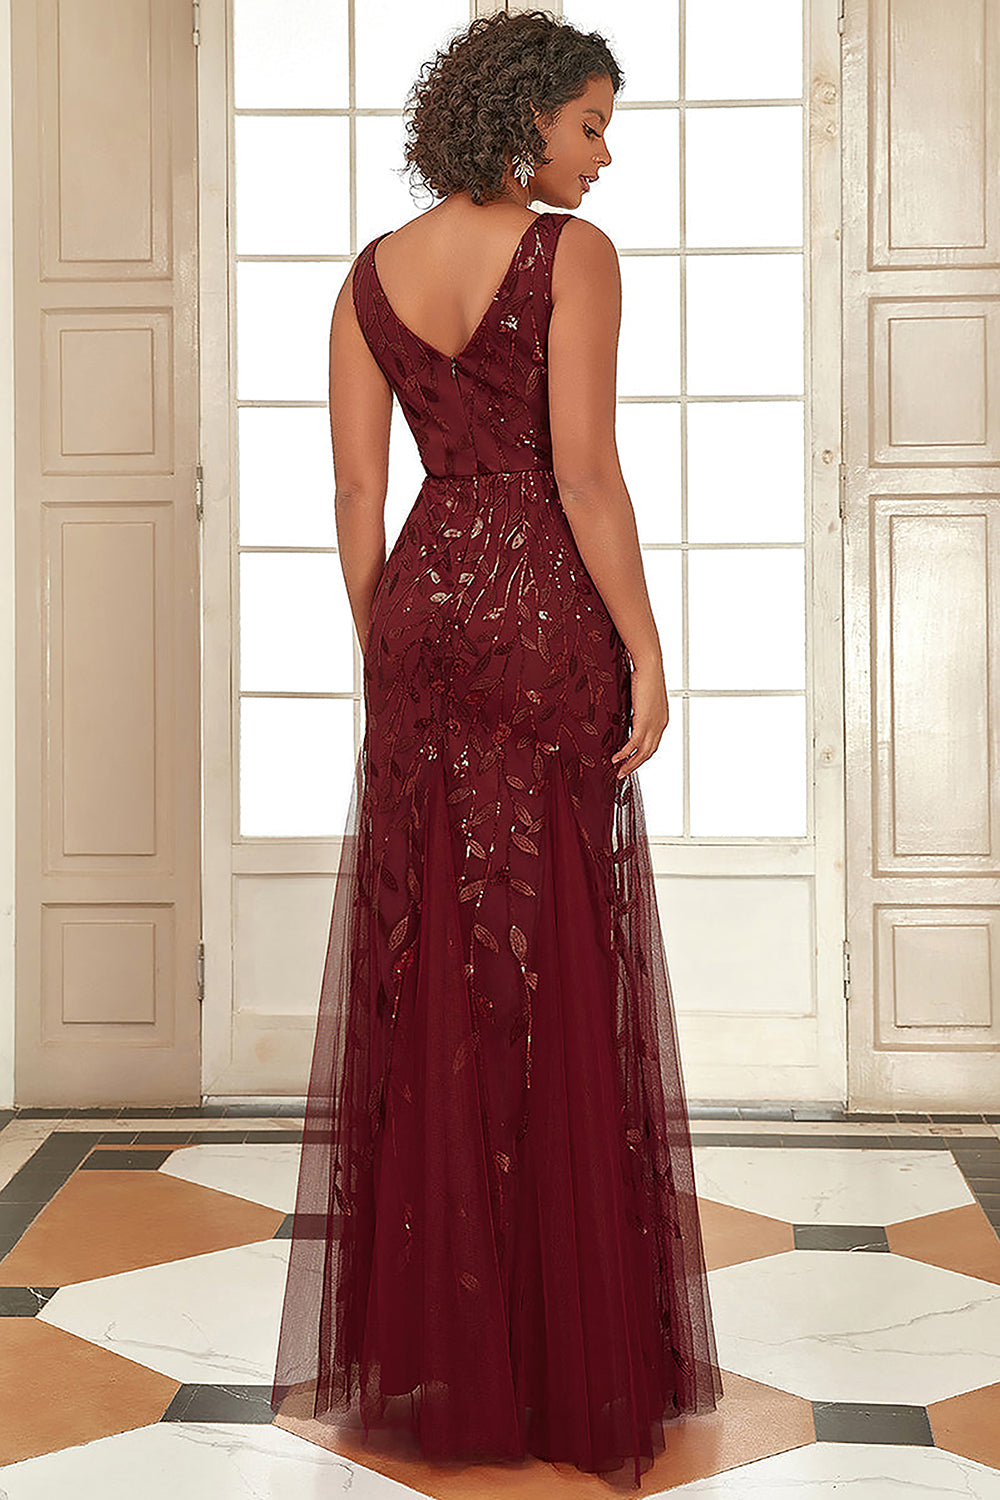 Embroidered Lace V-Neck Long Prom & Mother Of The Bride Dress AC7886-Mother of the Bride Dress-smcfashion.com